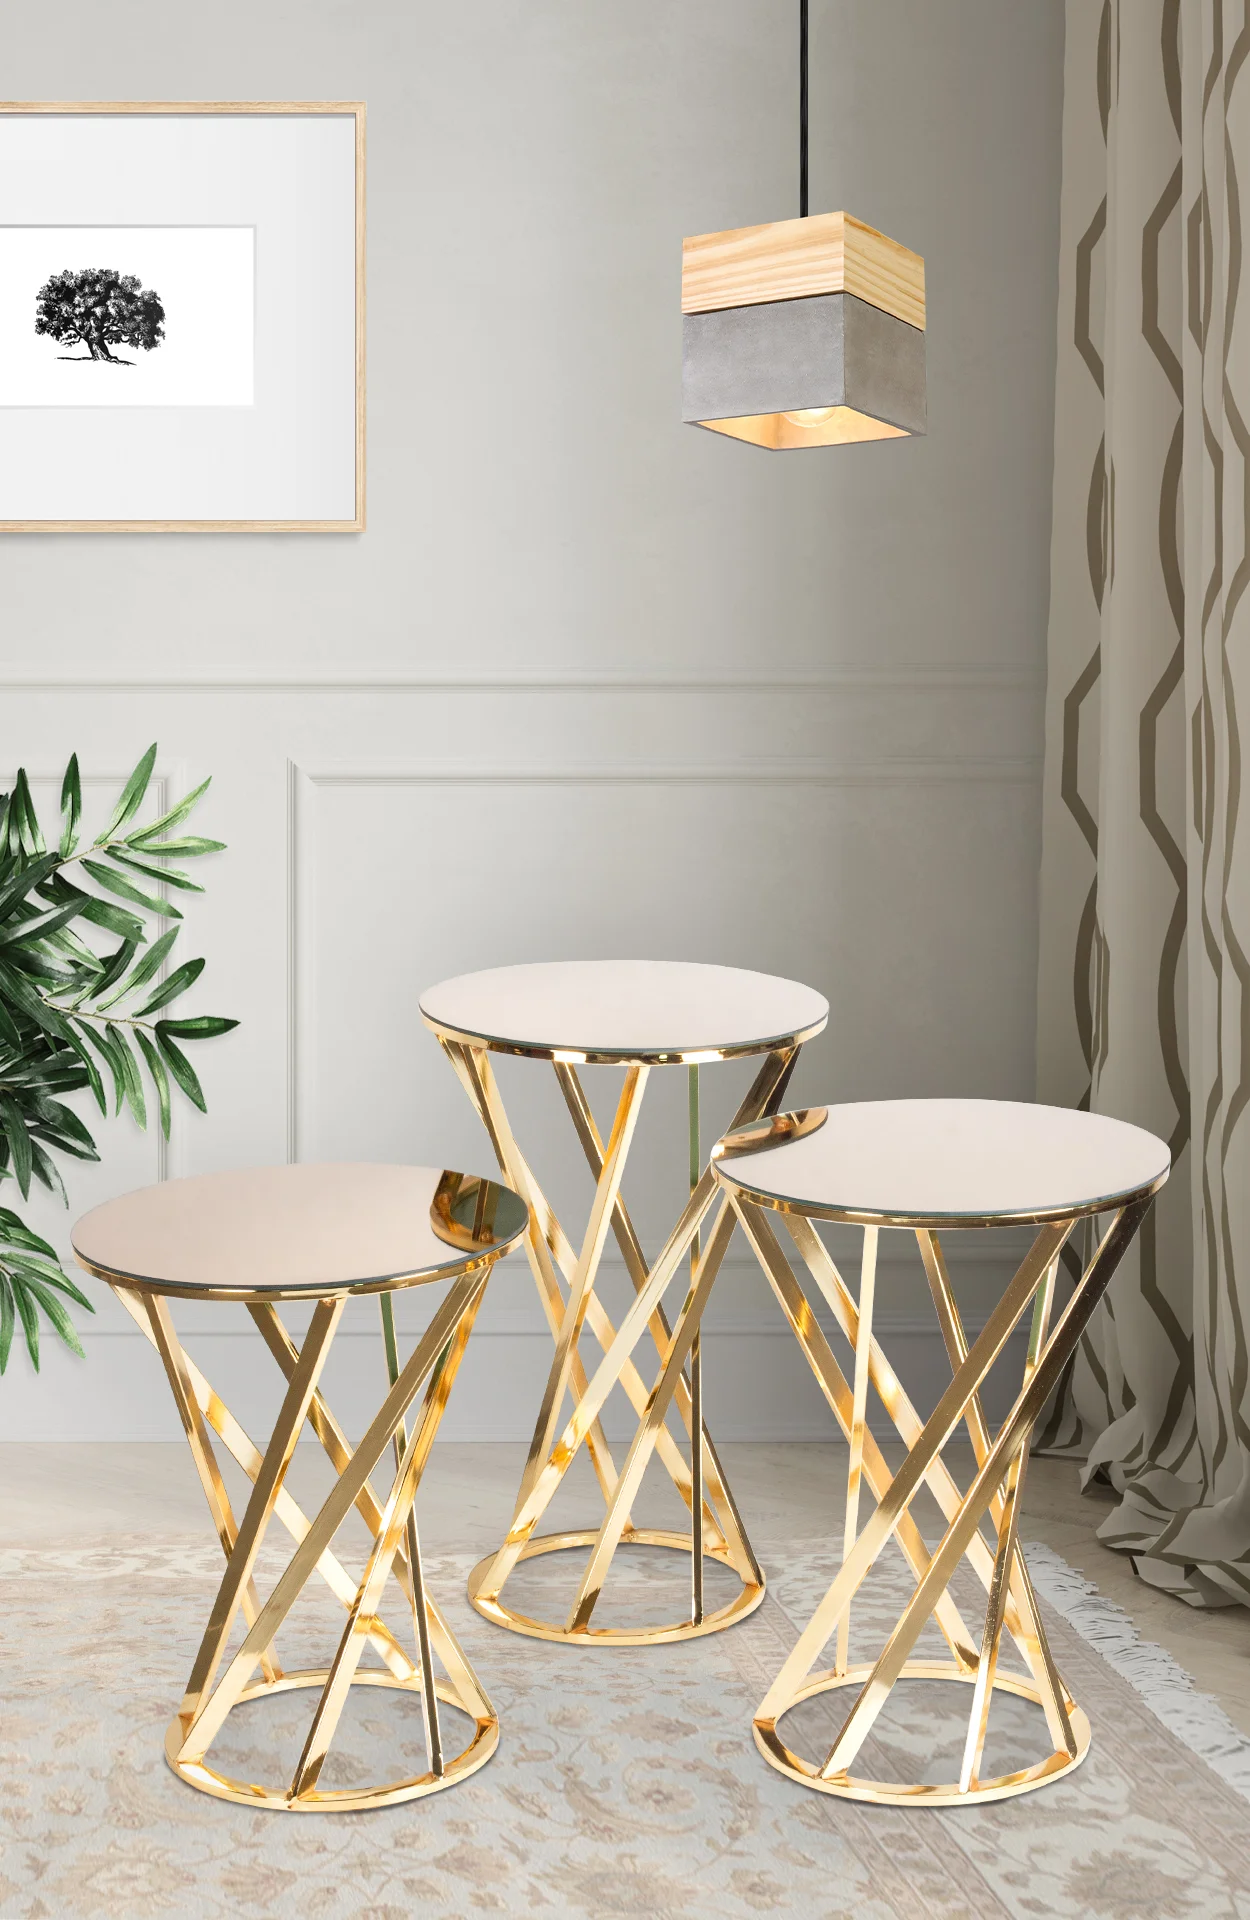 Mosvow Middle Coffee Table Round Gold 80 cm